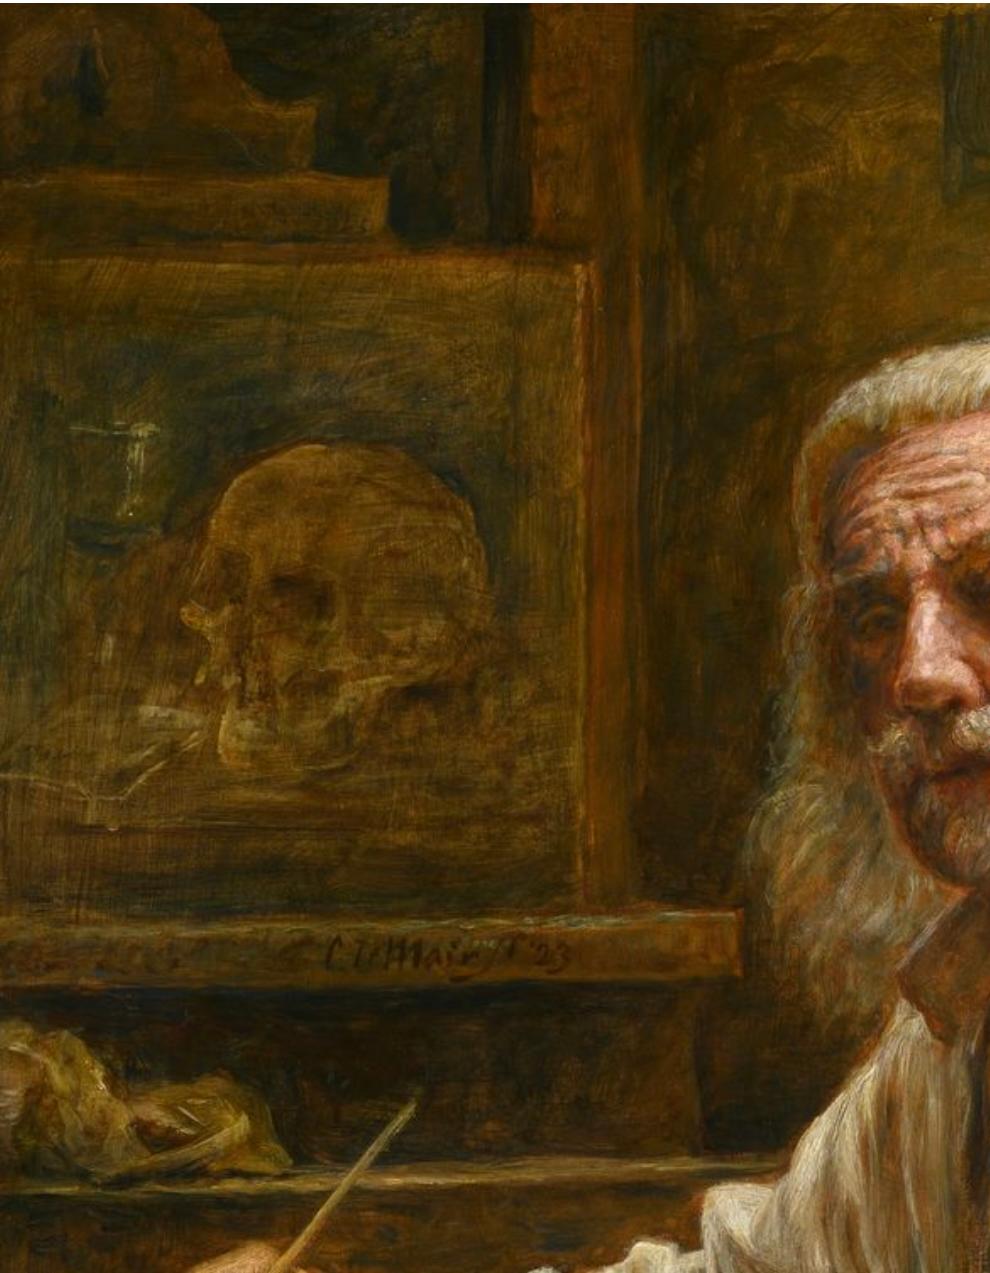 Self portrait at easel by Cornelis le Mair
115 x 105 cm ( frame included) without frame 90 x 80 cm
oil on wood panel

In 2024 this remarkable artist will reach the age of 80 years. Still painting every day, and still painting in is own unique style.